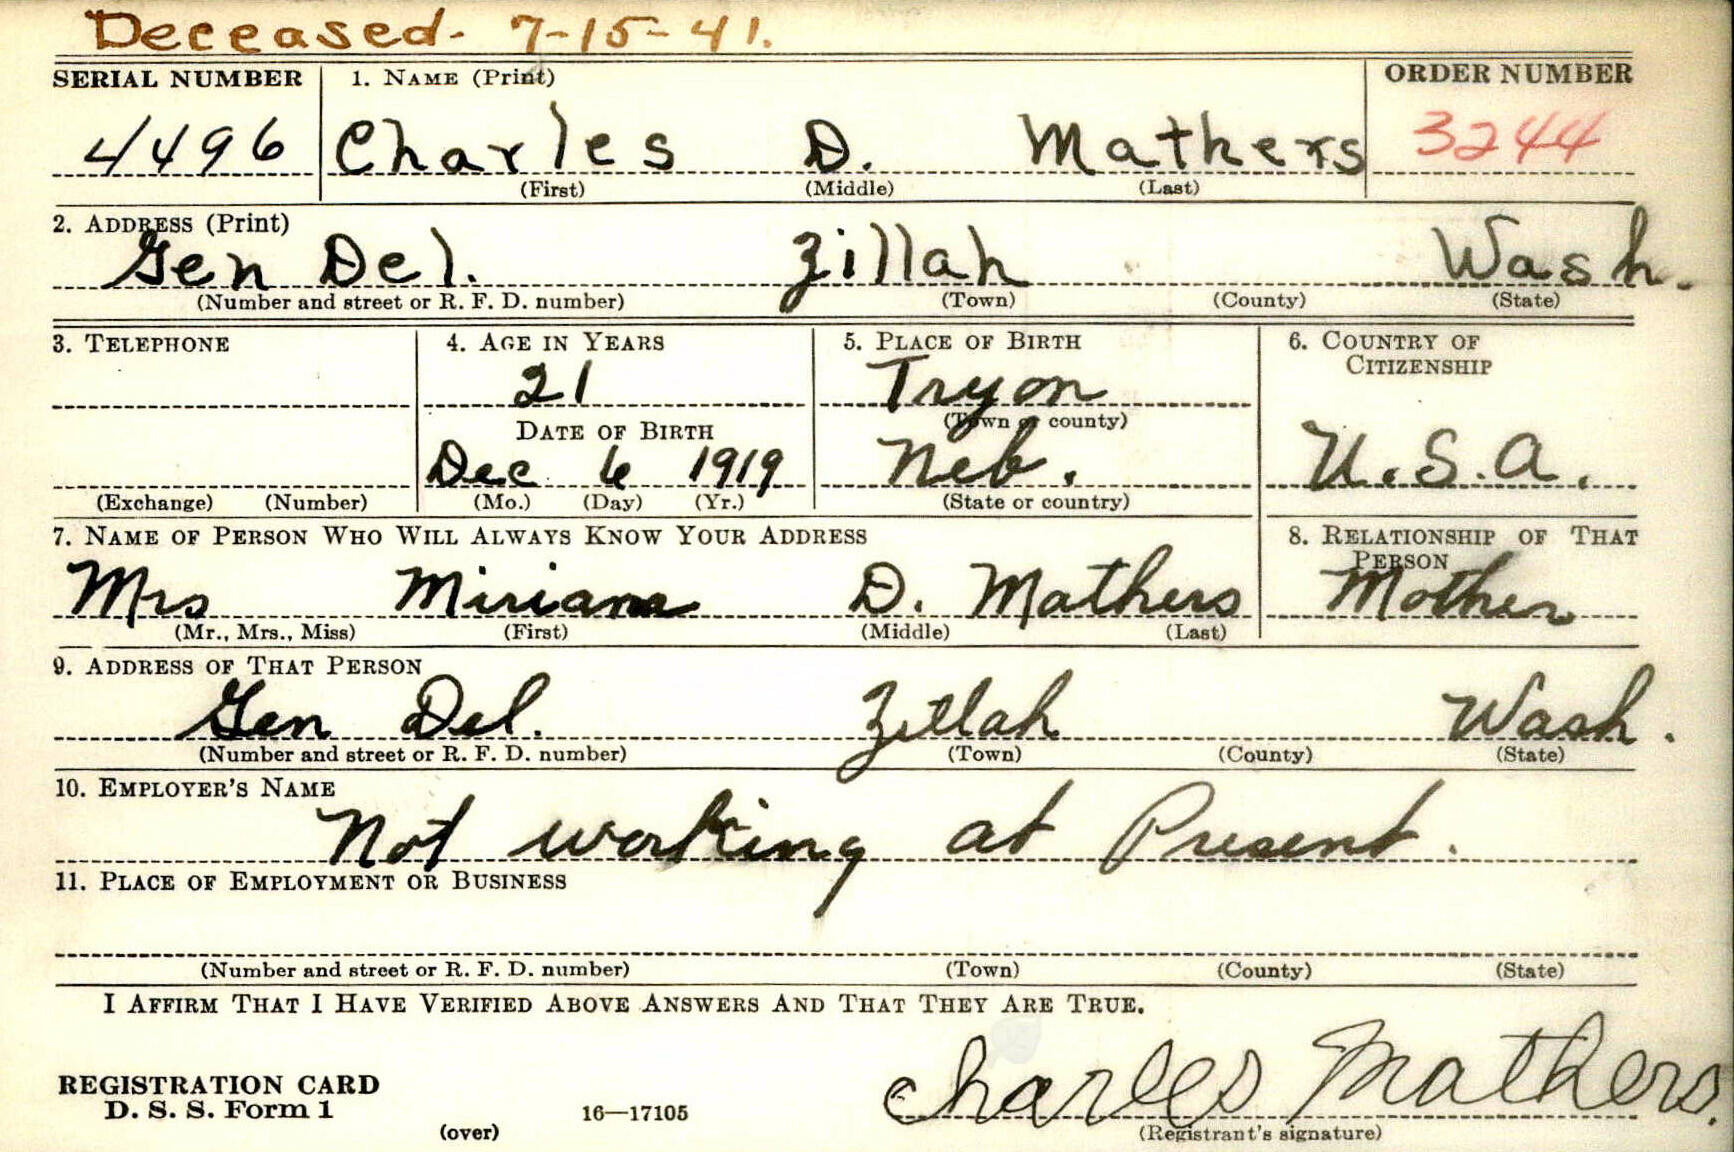 Only months before his death in 1941, Miriam Mathers’ son Charles registered for the military draft.